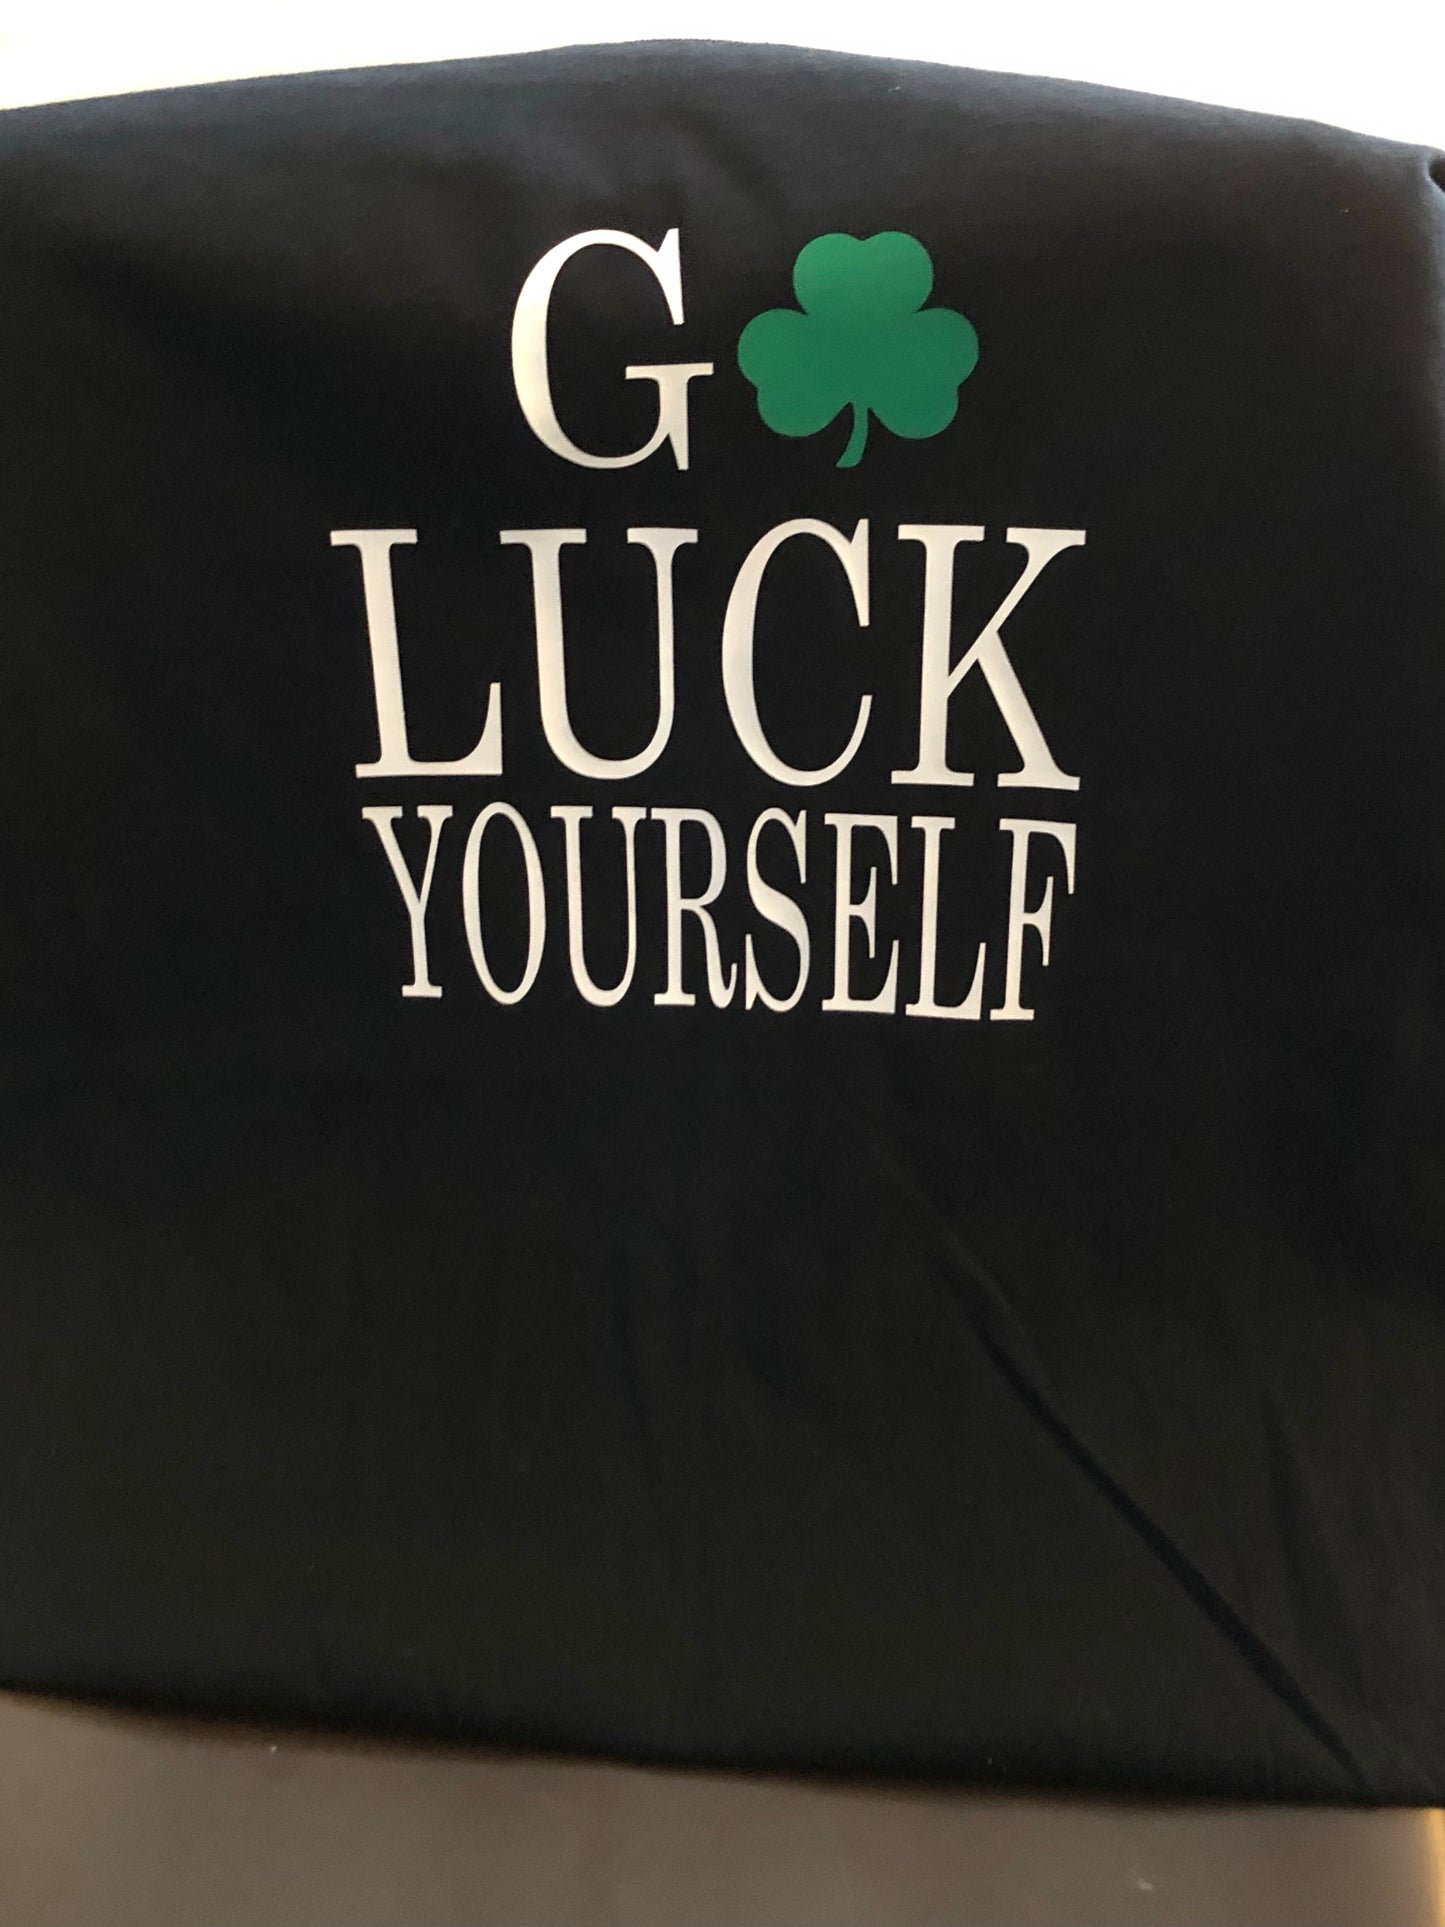 Go Luck Yourself St Patrick’s Day Green Clover t-shirt